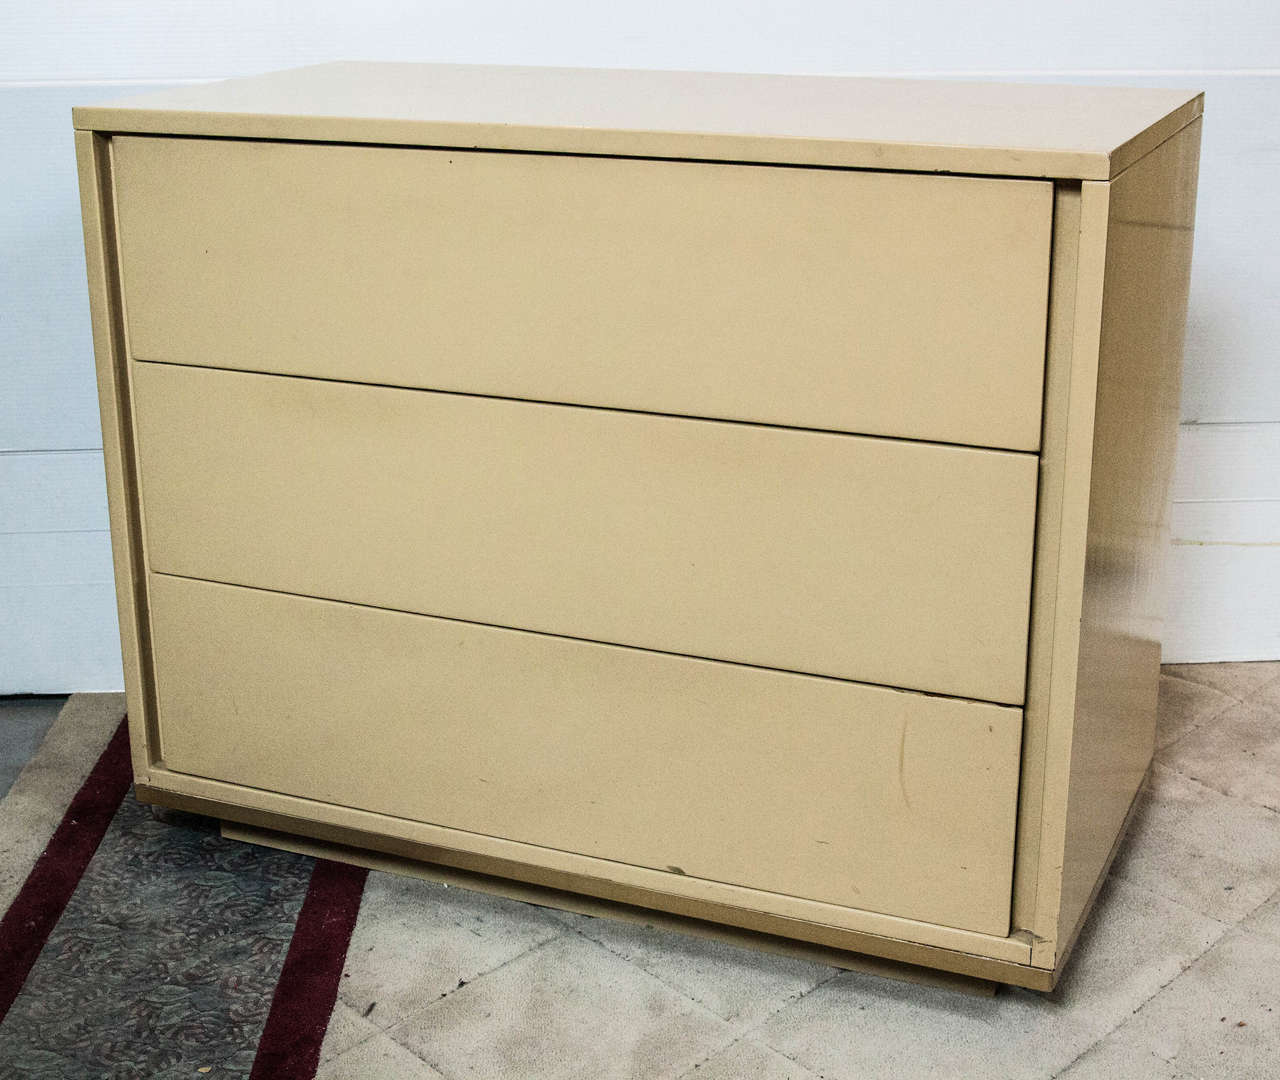 Great pair of John Stuart chests. In a crème lacquer having three deep full drawers. Mid-Century Modern design for crisp clean lines. Stamped John Stuart. There is a matching pair of hi chests which are sold separately.